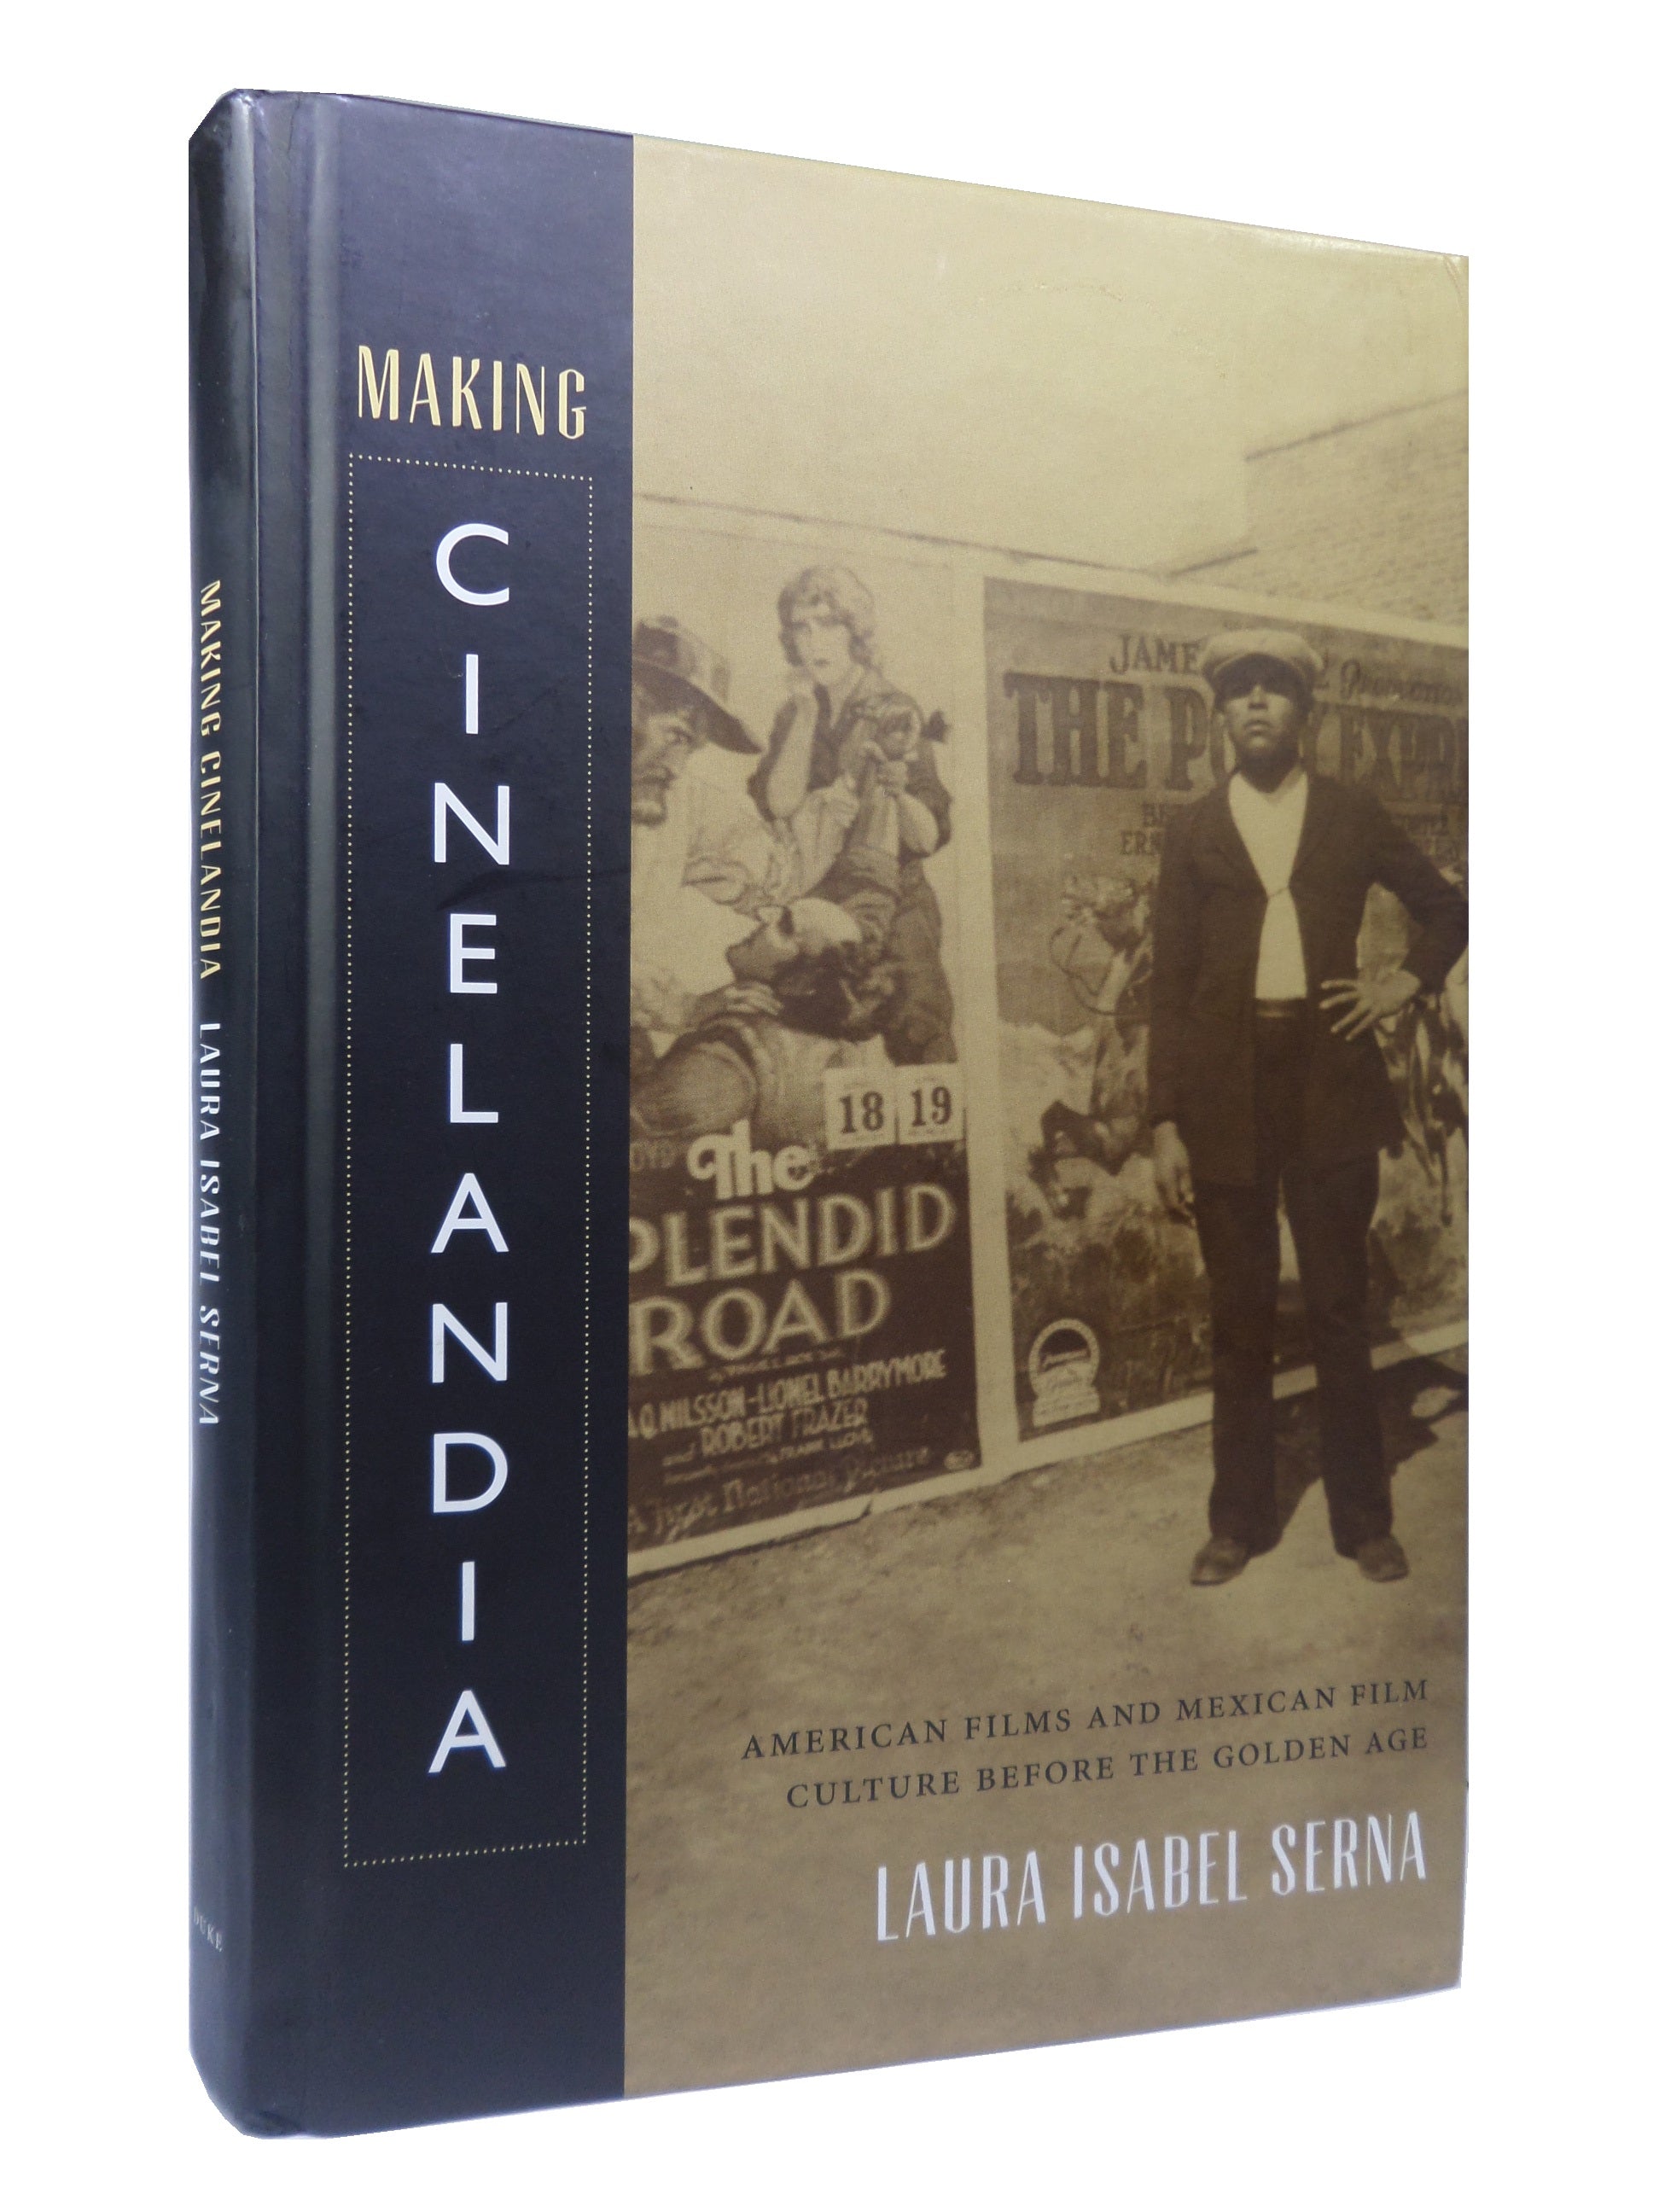 MAKING CINELANDIA: AMERICAN FILMS AND MEXICAN FILM CULTURE BEFORE THE GOLDEN AGE